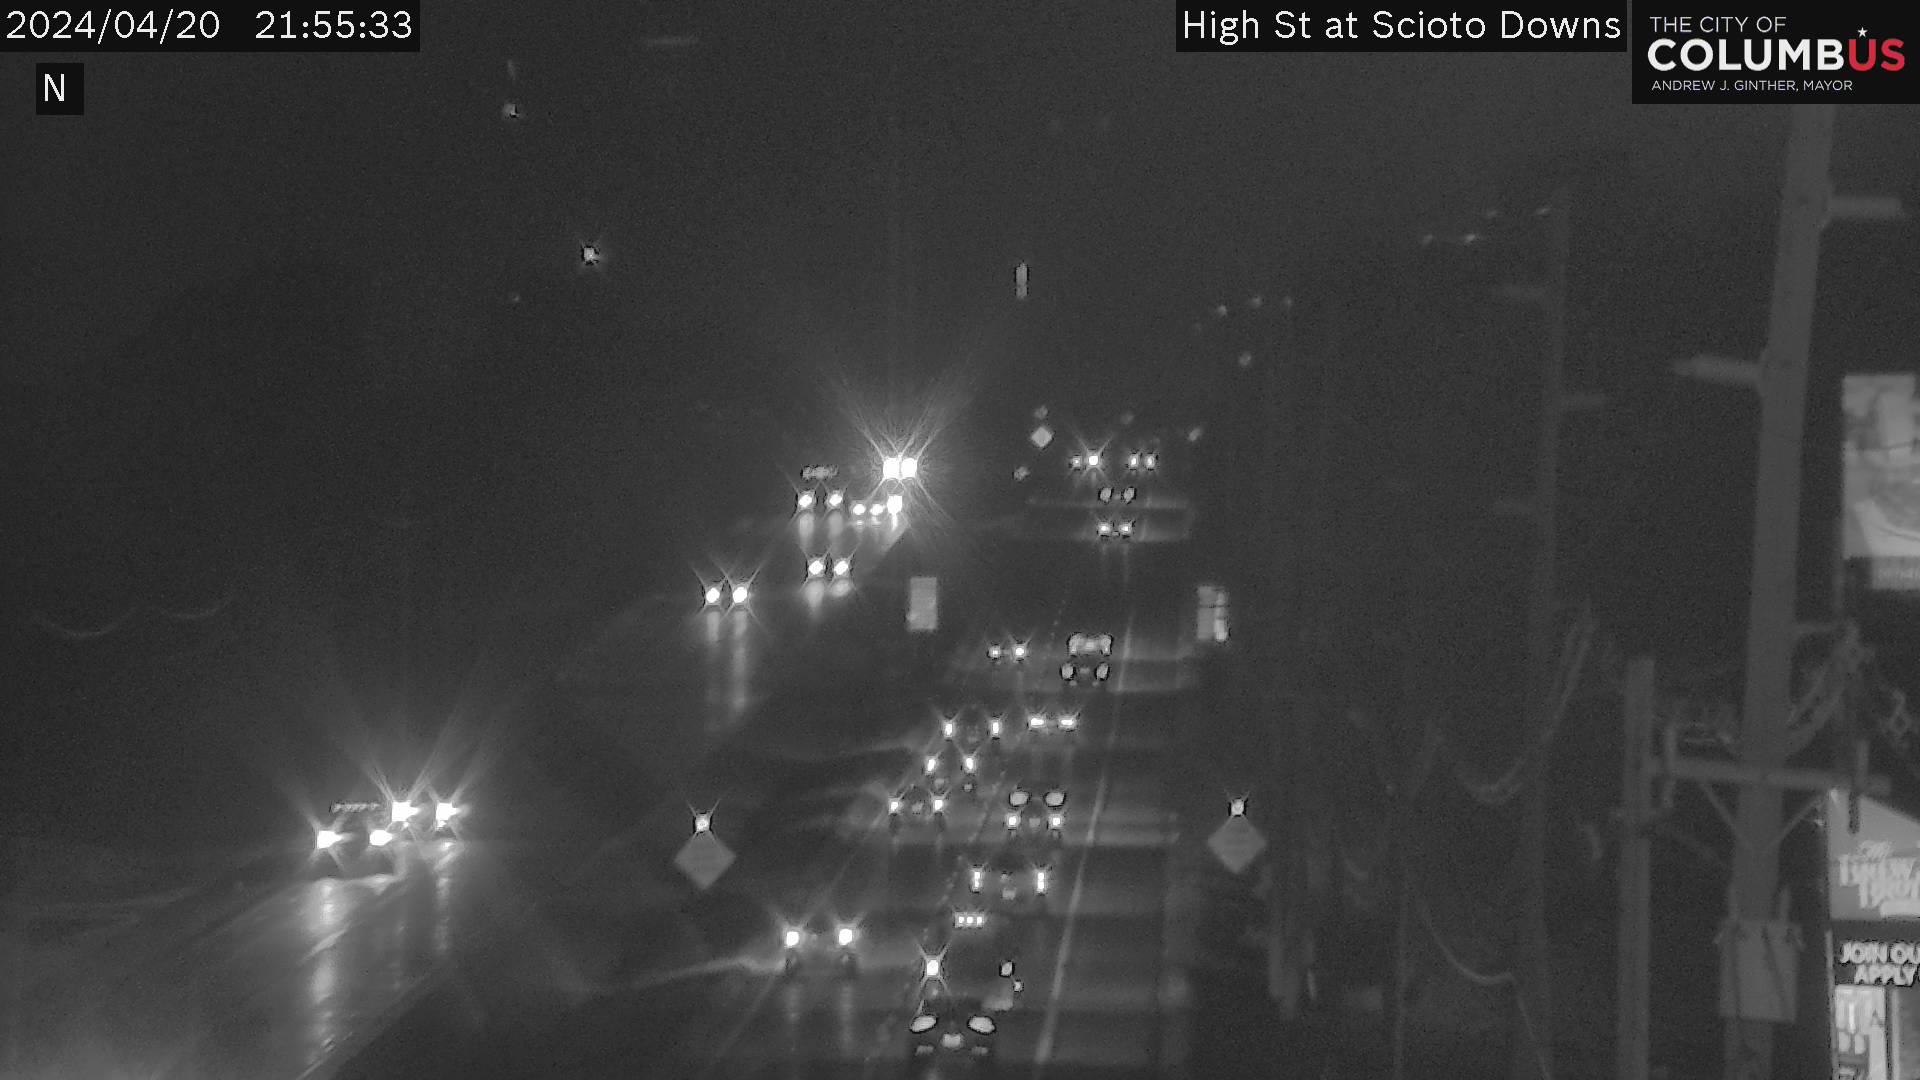 Traffic Cam Shadeville: City of Columbus) High St at Scioto Downs Player